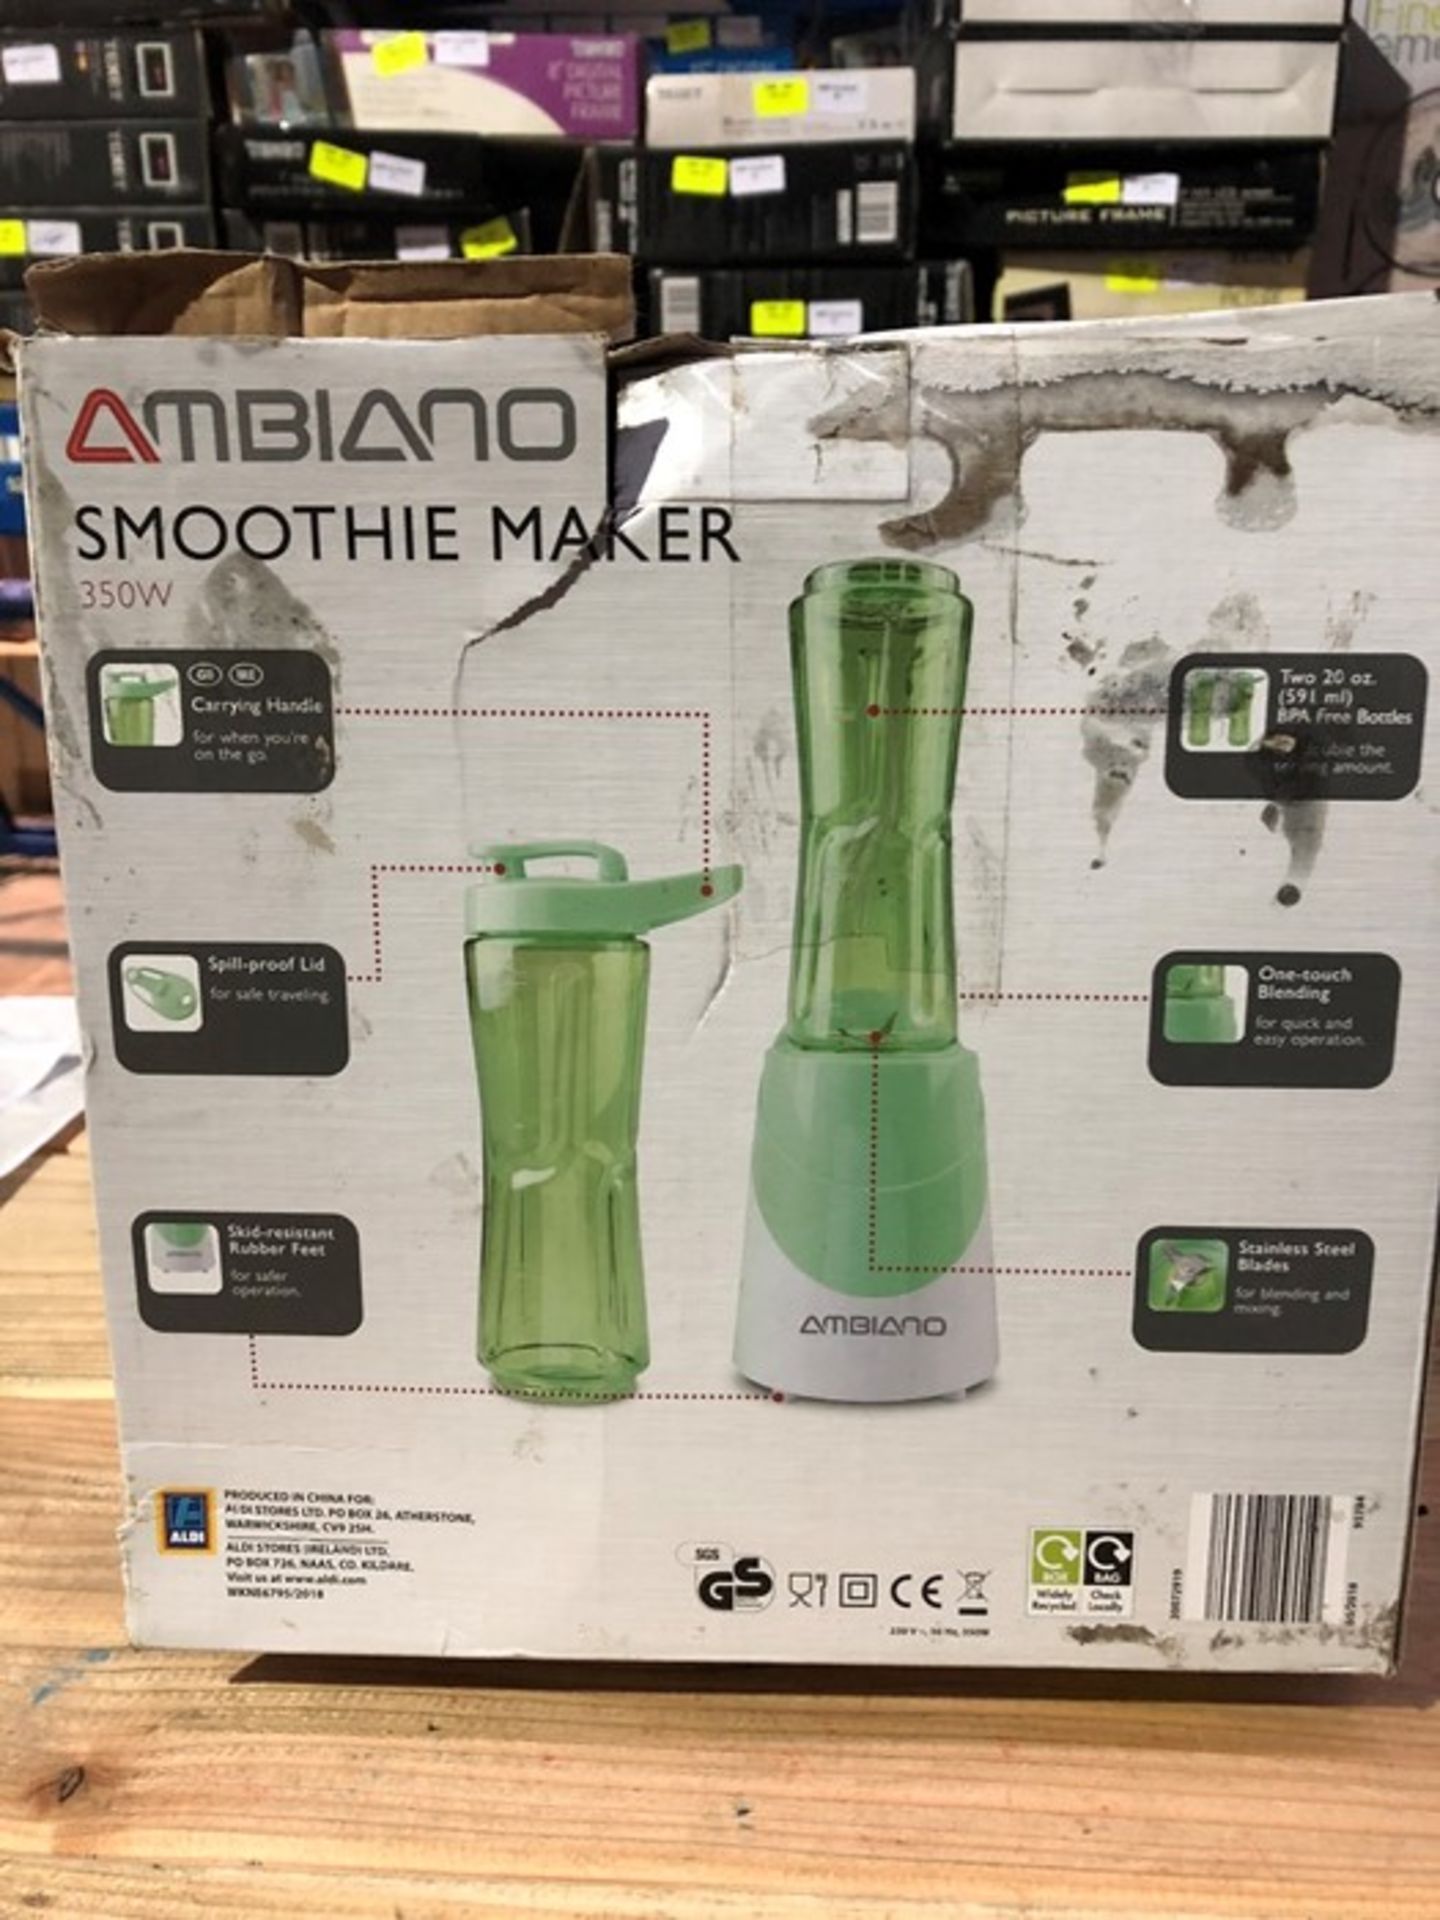 1 BOXED AMBIANO SMOOTHIE MAKER IN GREEN / RRP £14.99 (PUBLIC VIEWING AVAILABLE)